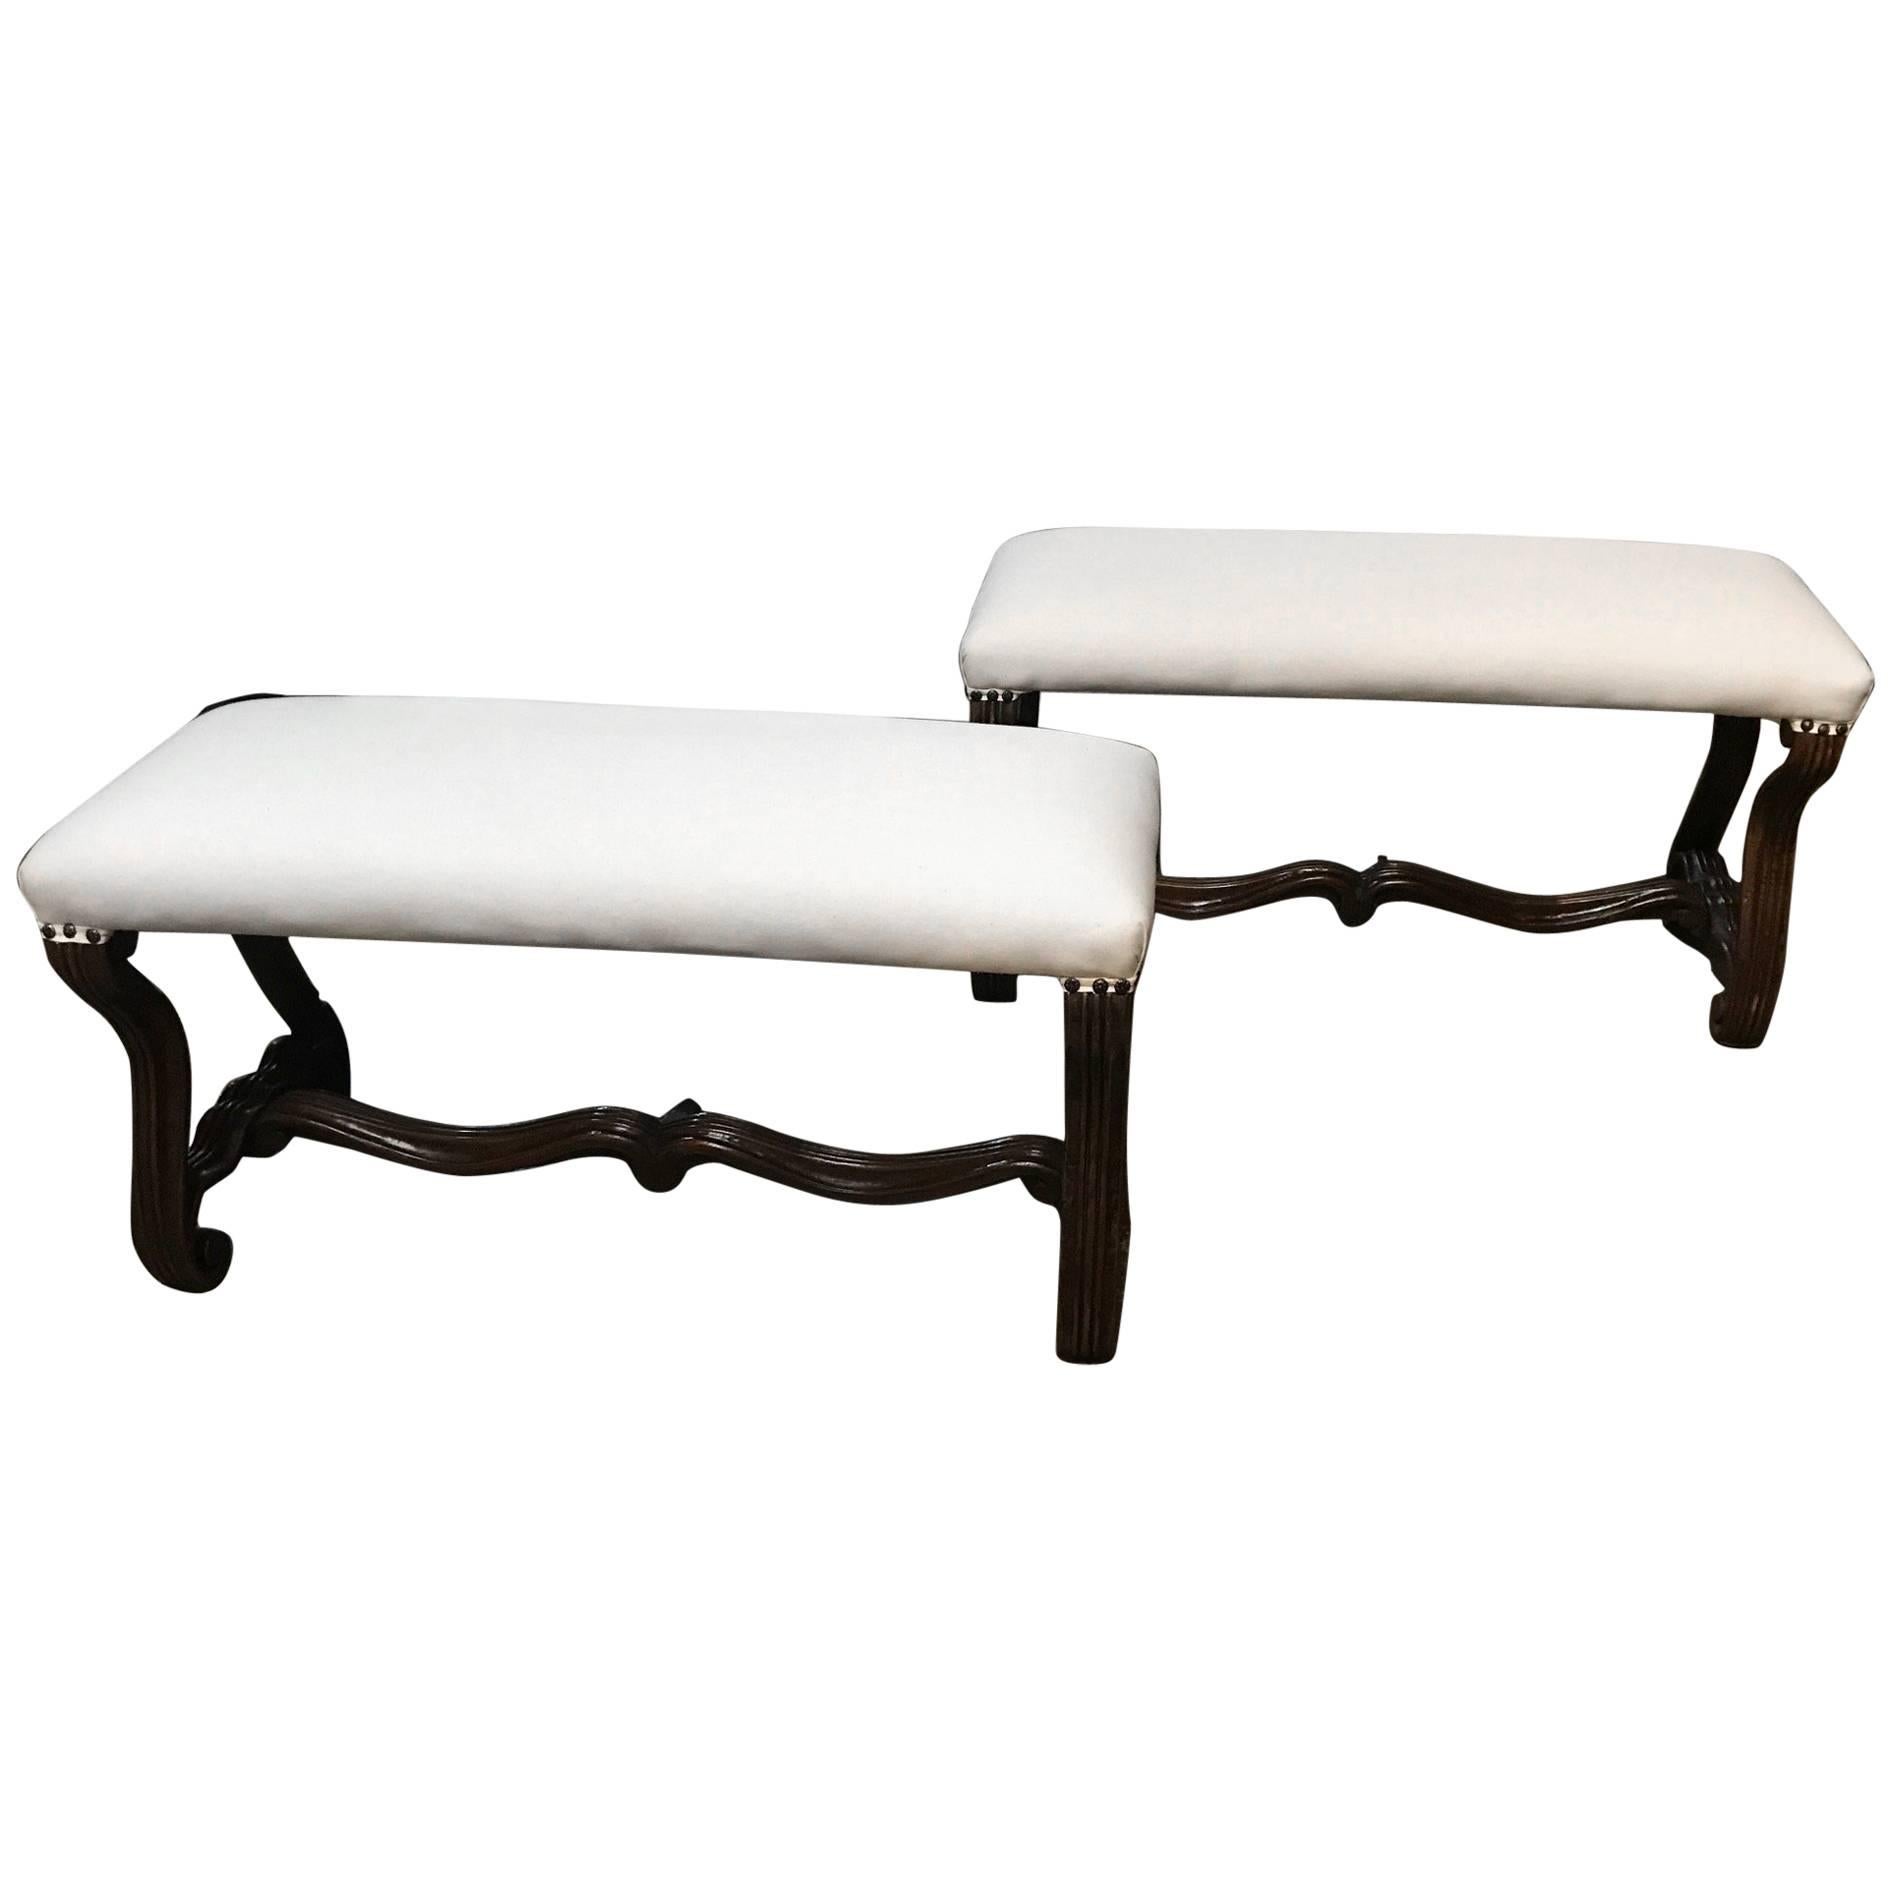 Pair of French Louis XIII Style Benches